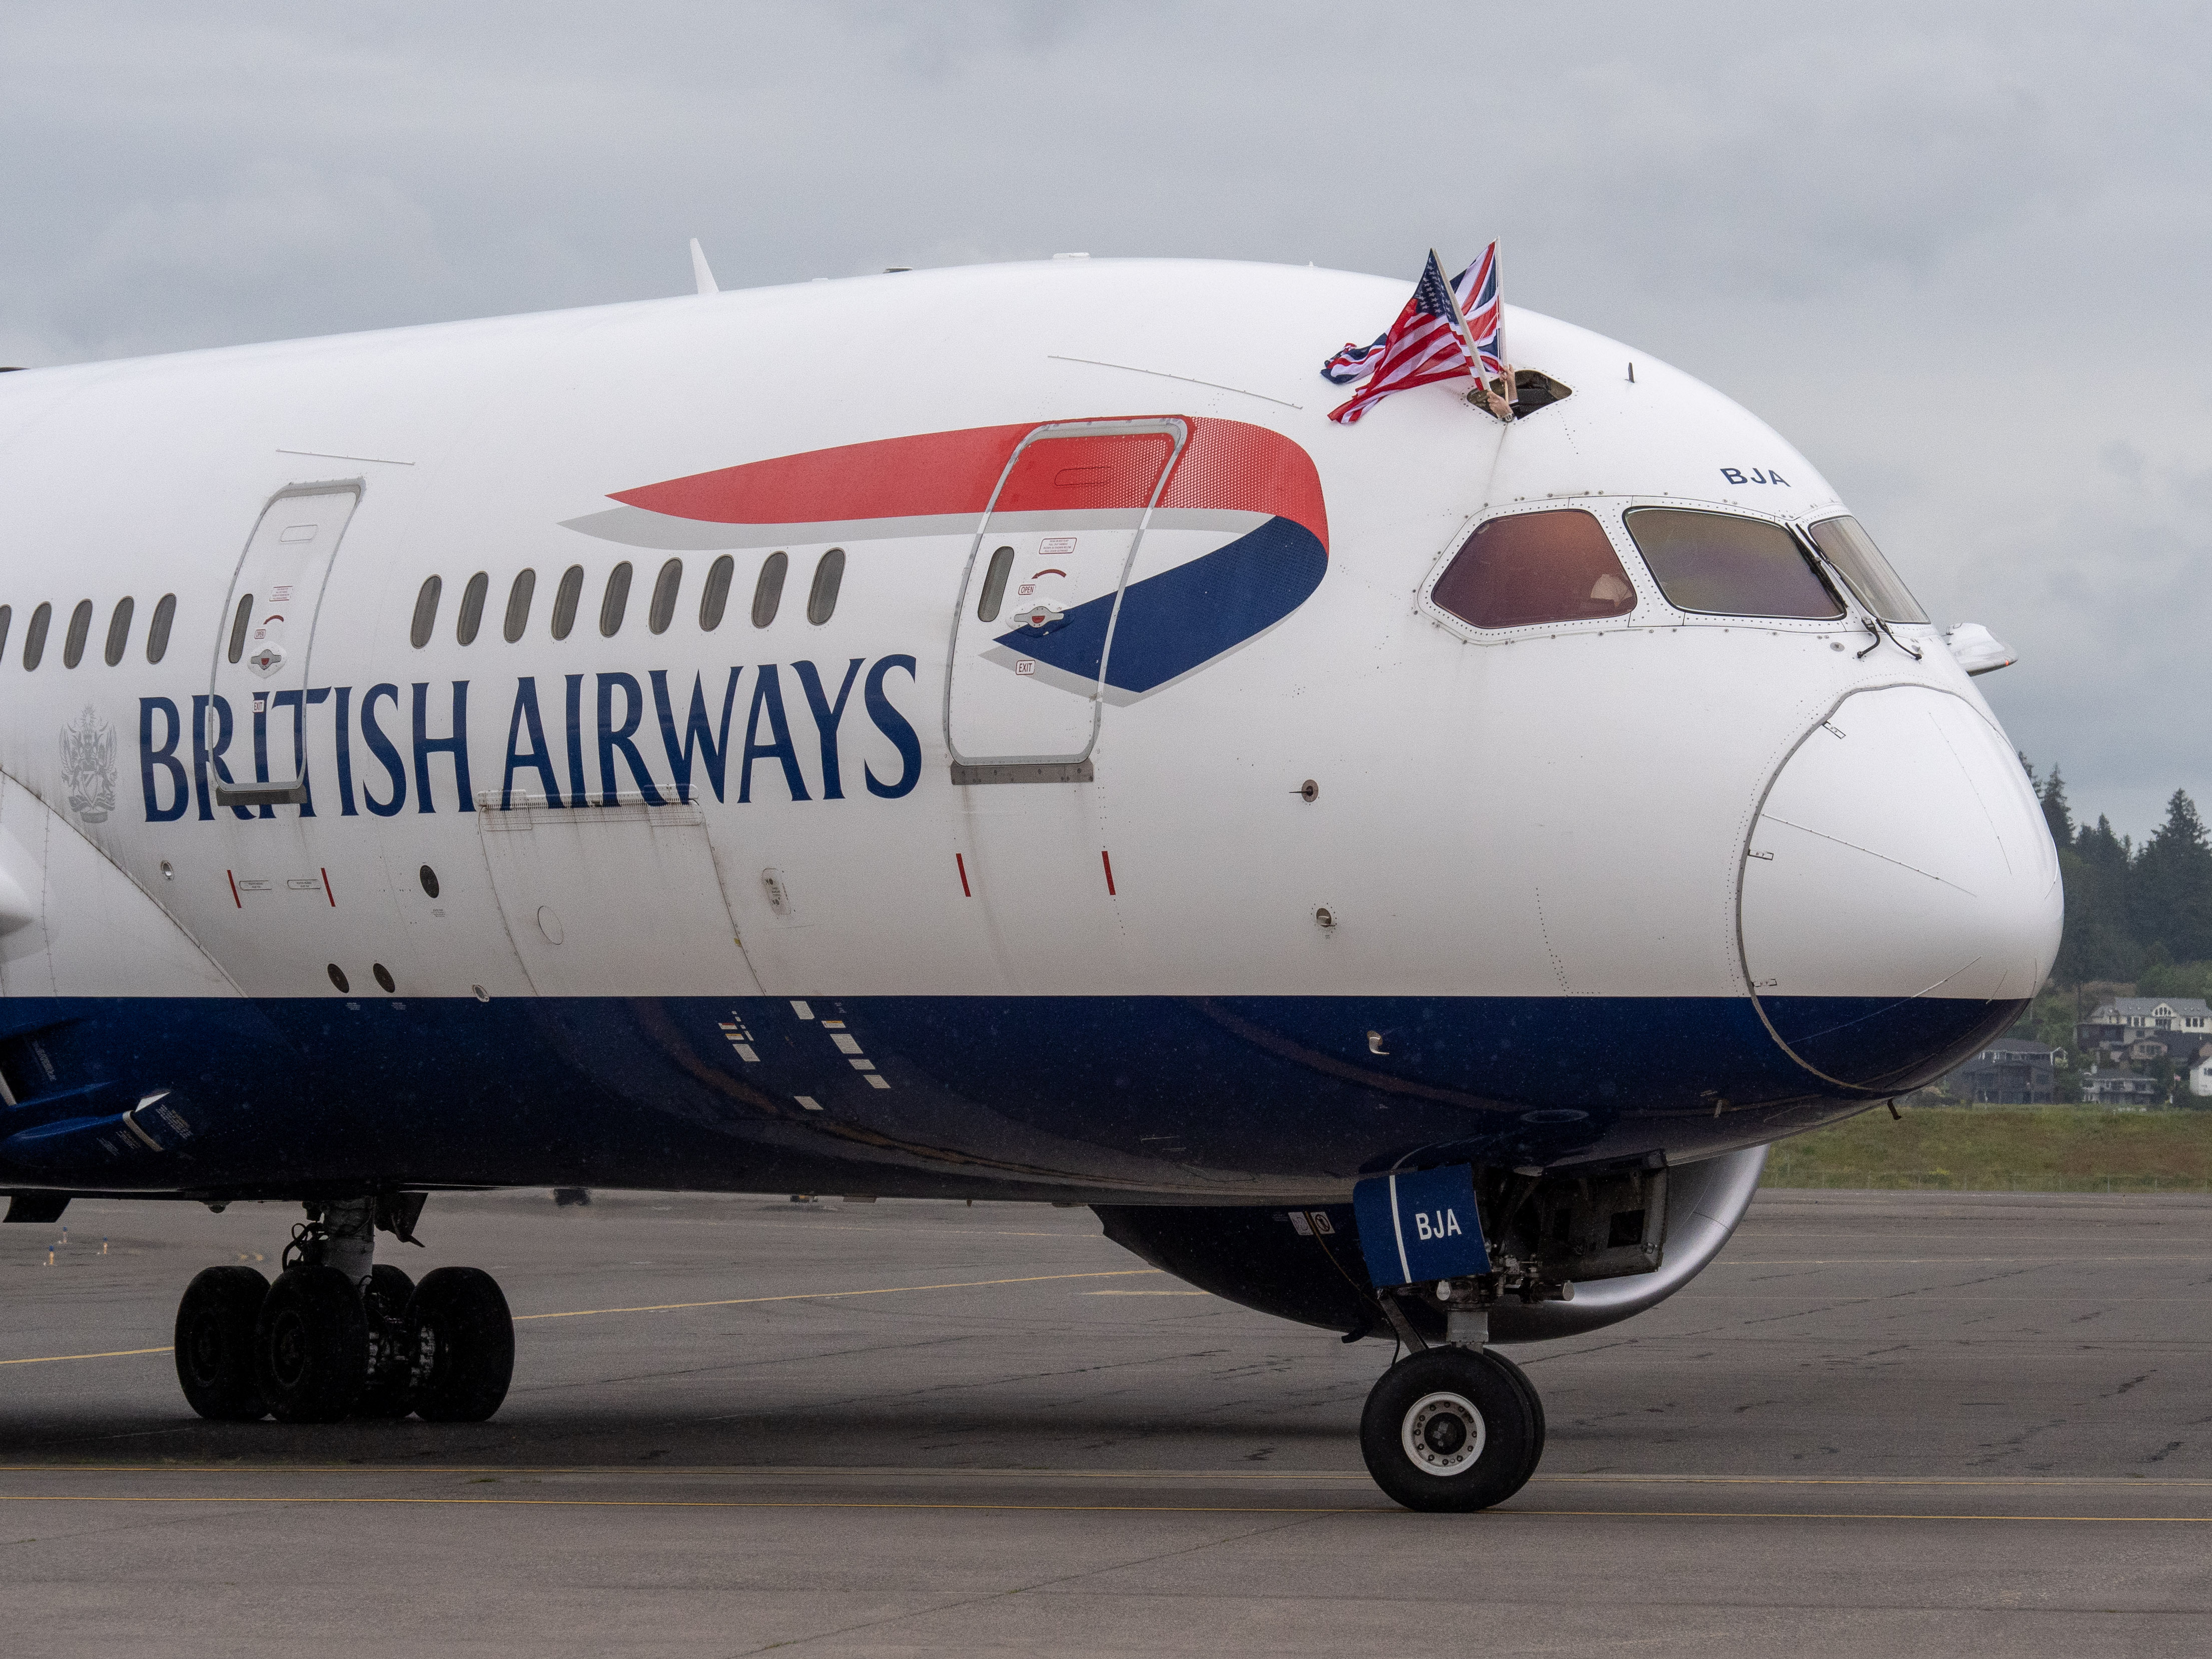 Touchdown in Portland: British Airways Launches First Direct Route from Oregon to London